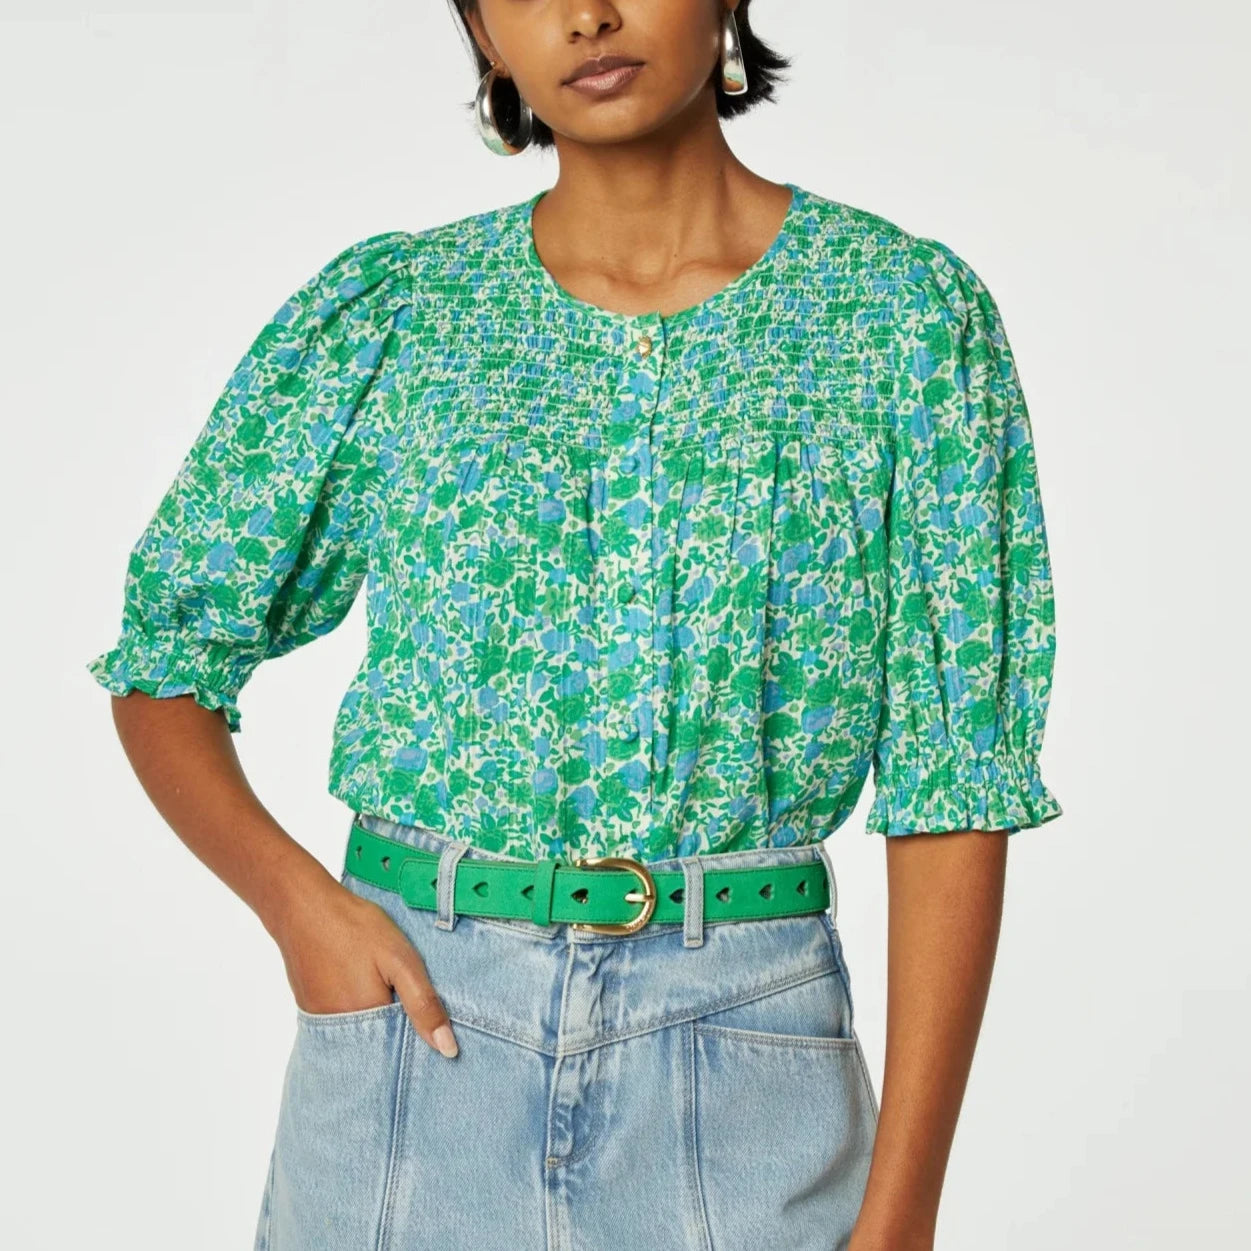 Woman wearing a Fabienne Chapot June Short Sleeve Organic Top in Green Clueless and high-waisted jeans, accessorized with a green belt. Only torso and up shown, against a plain background.